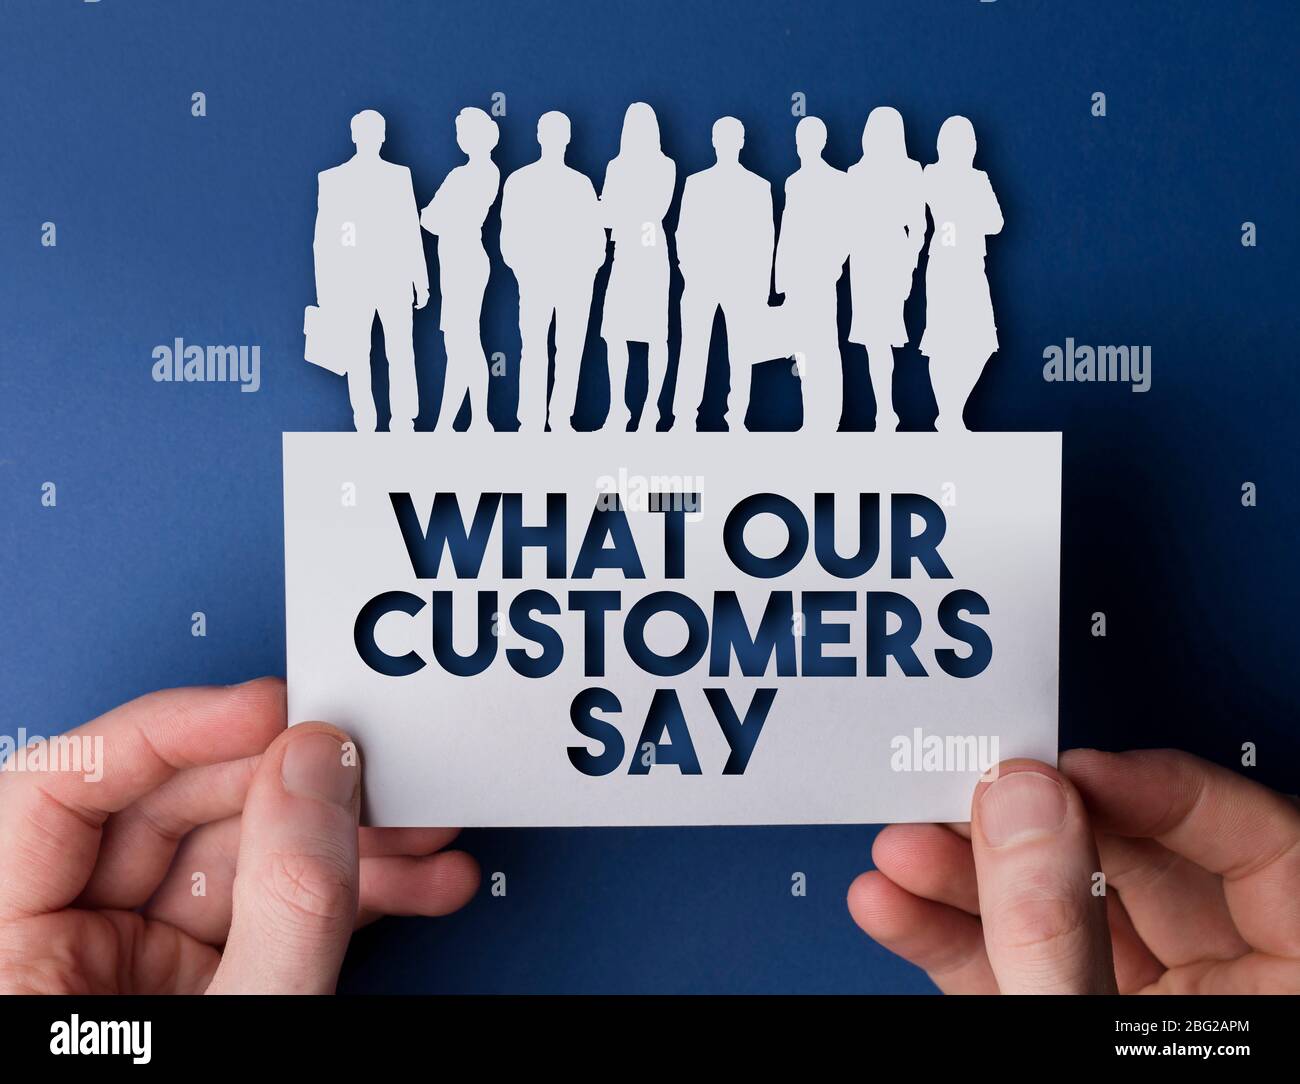 Hands holding a customer focus white card business team people sign Stock Photo